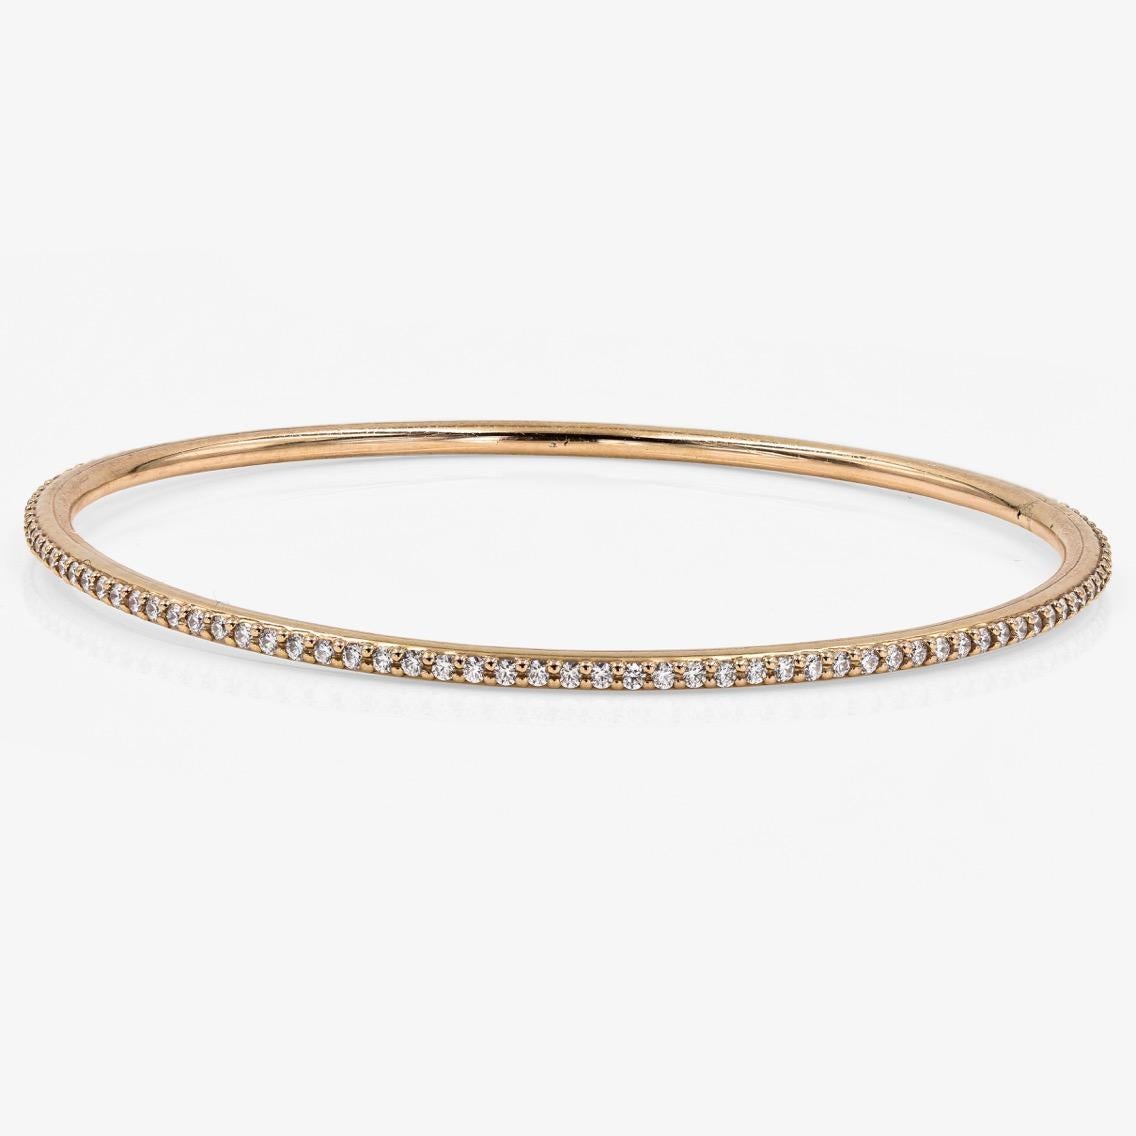 This Lester Lampert original D-Bead™ style bangle bracelet in 18kt. rose gold contains 114 ideal cut round diamonds= 1.82cts. t.w. There is no clasp.

Every Lester Lampert piece will arrive in an elegant custom jewelry box.